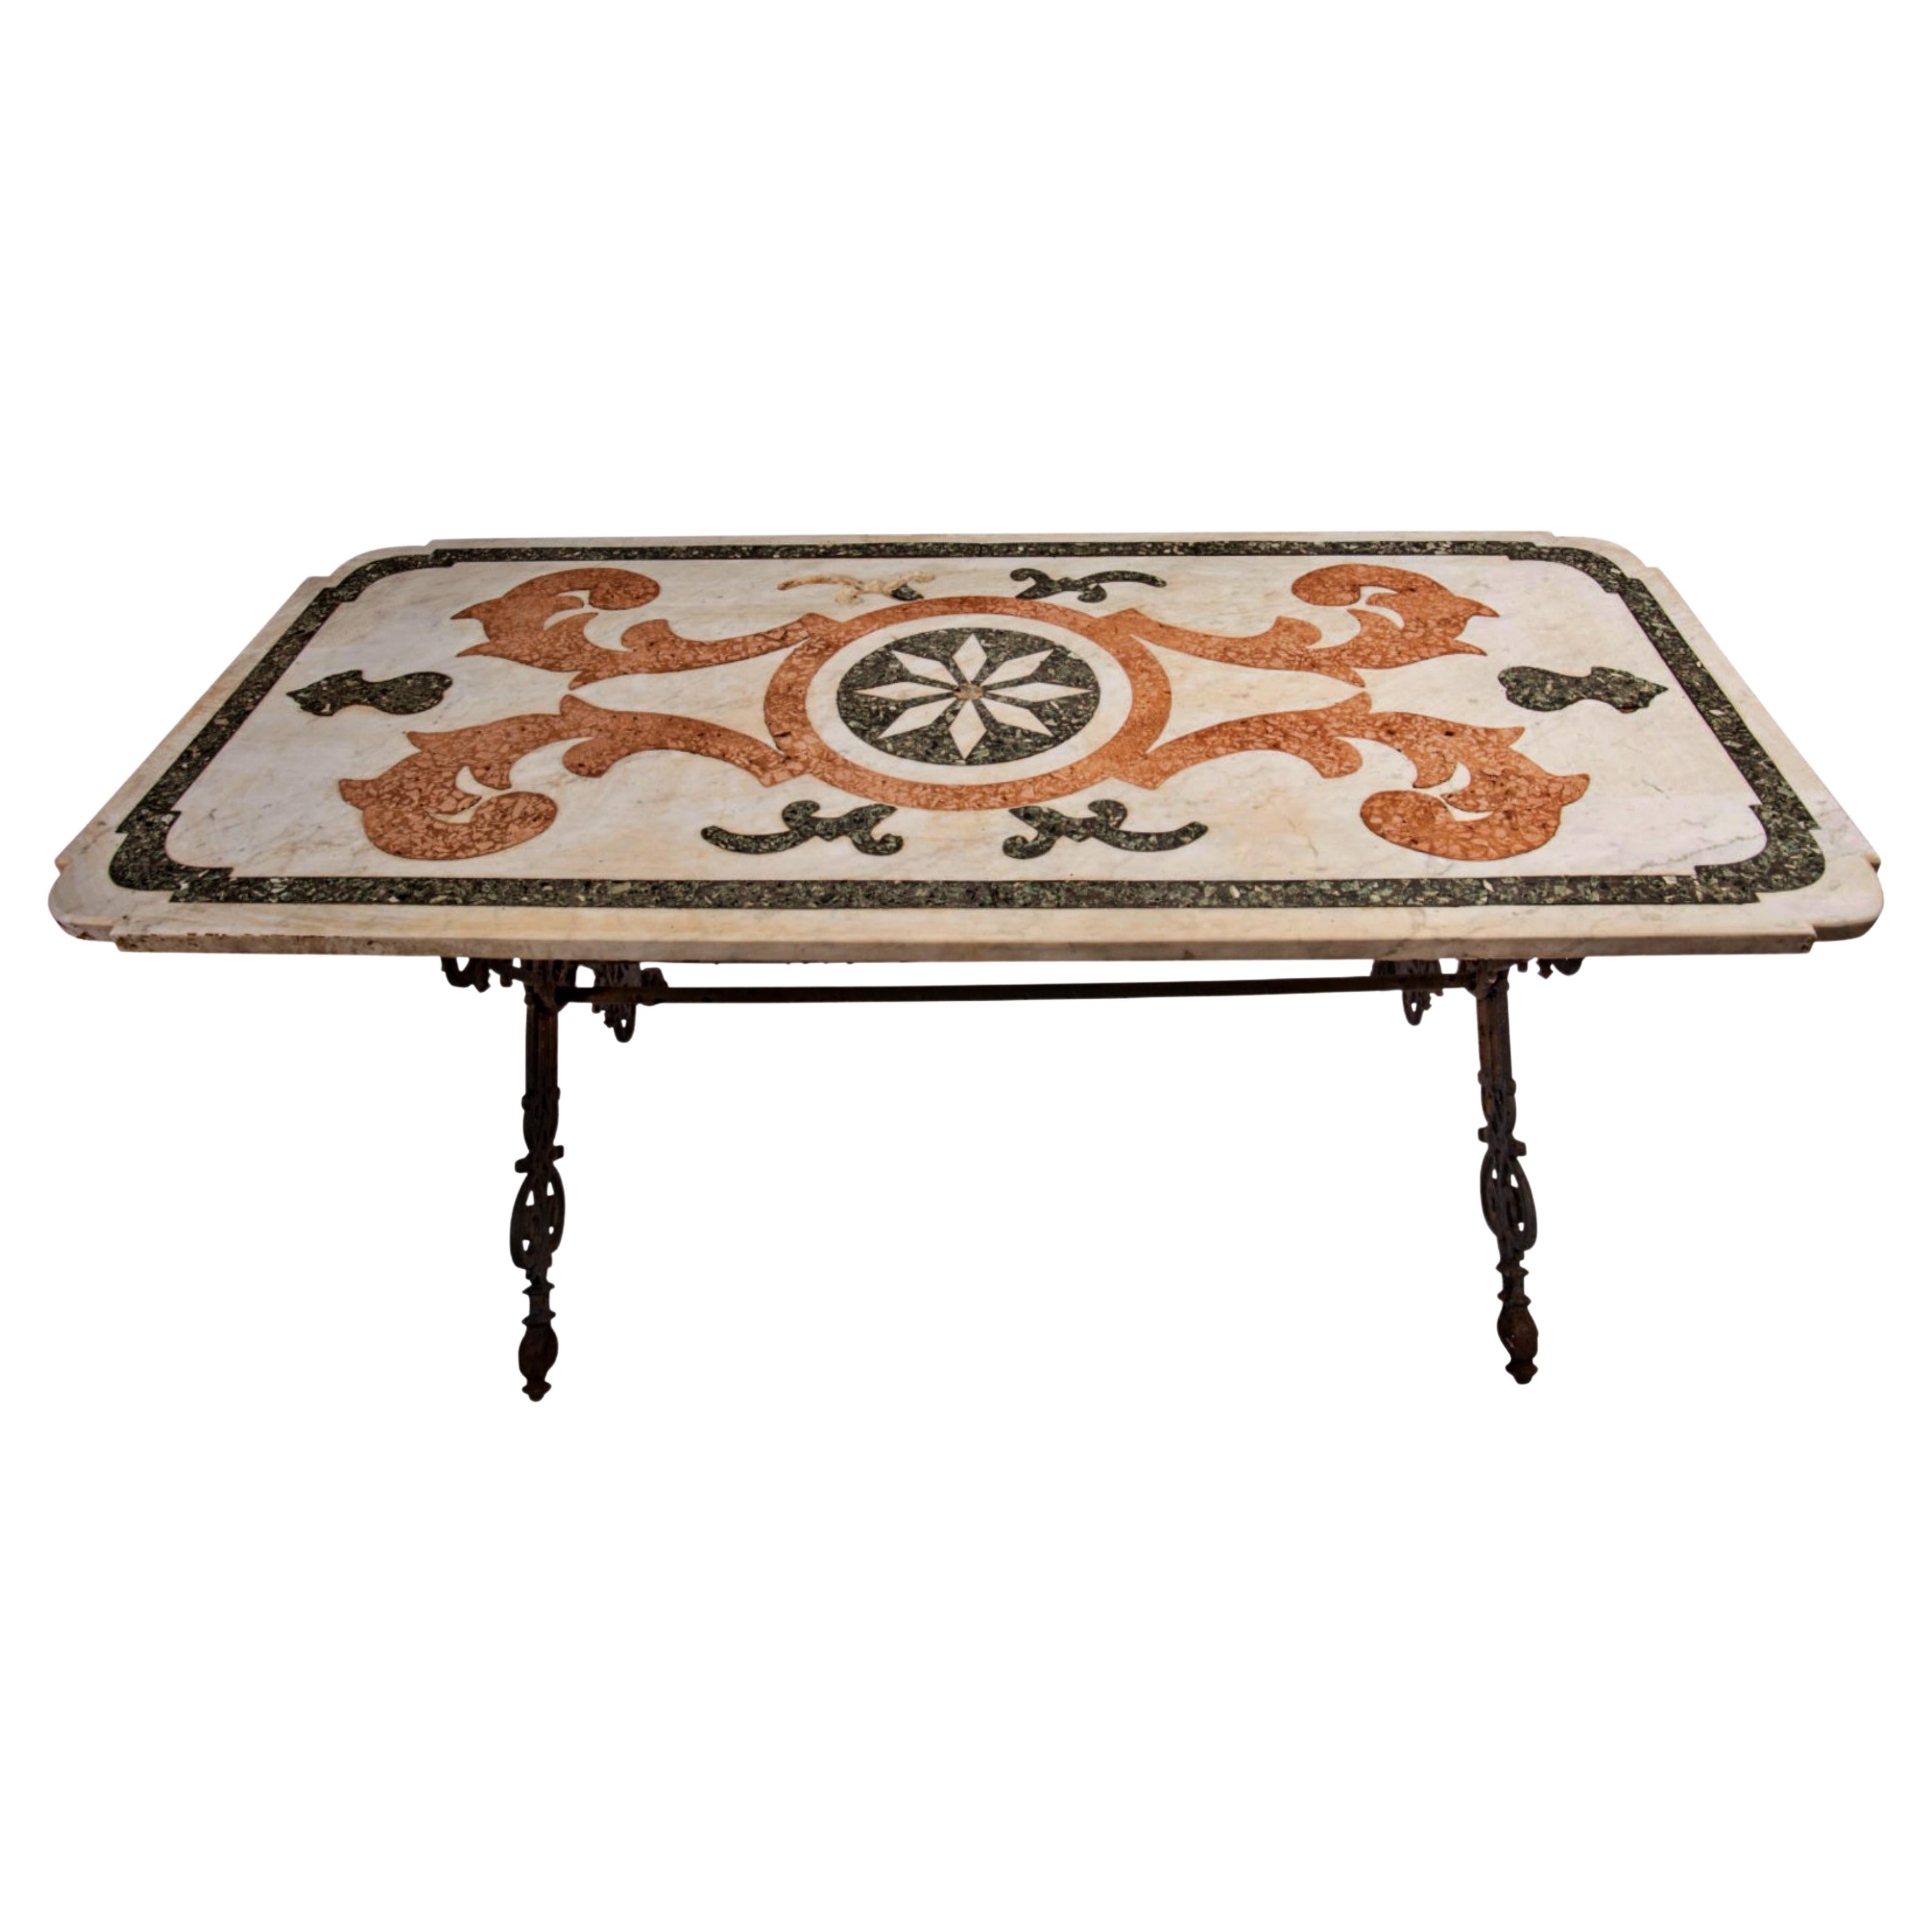 Italian Table with Inlaid Marble Top Feet in Cast Iron Italy, Late 19th Century